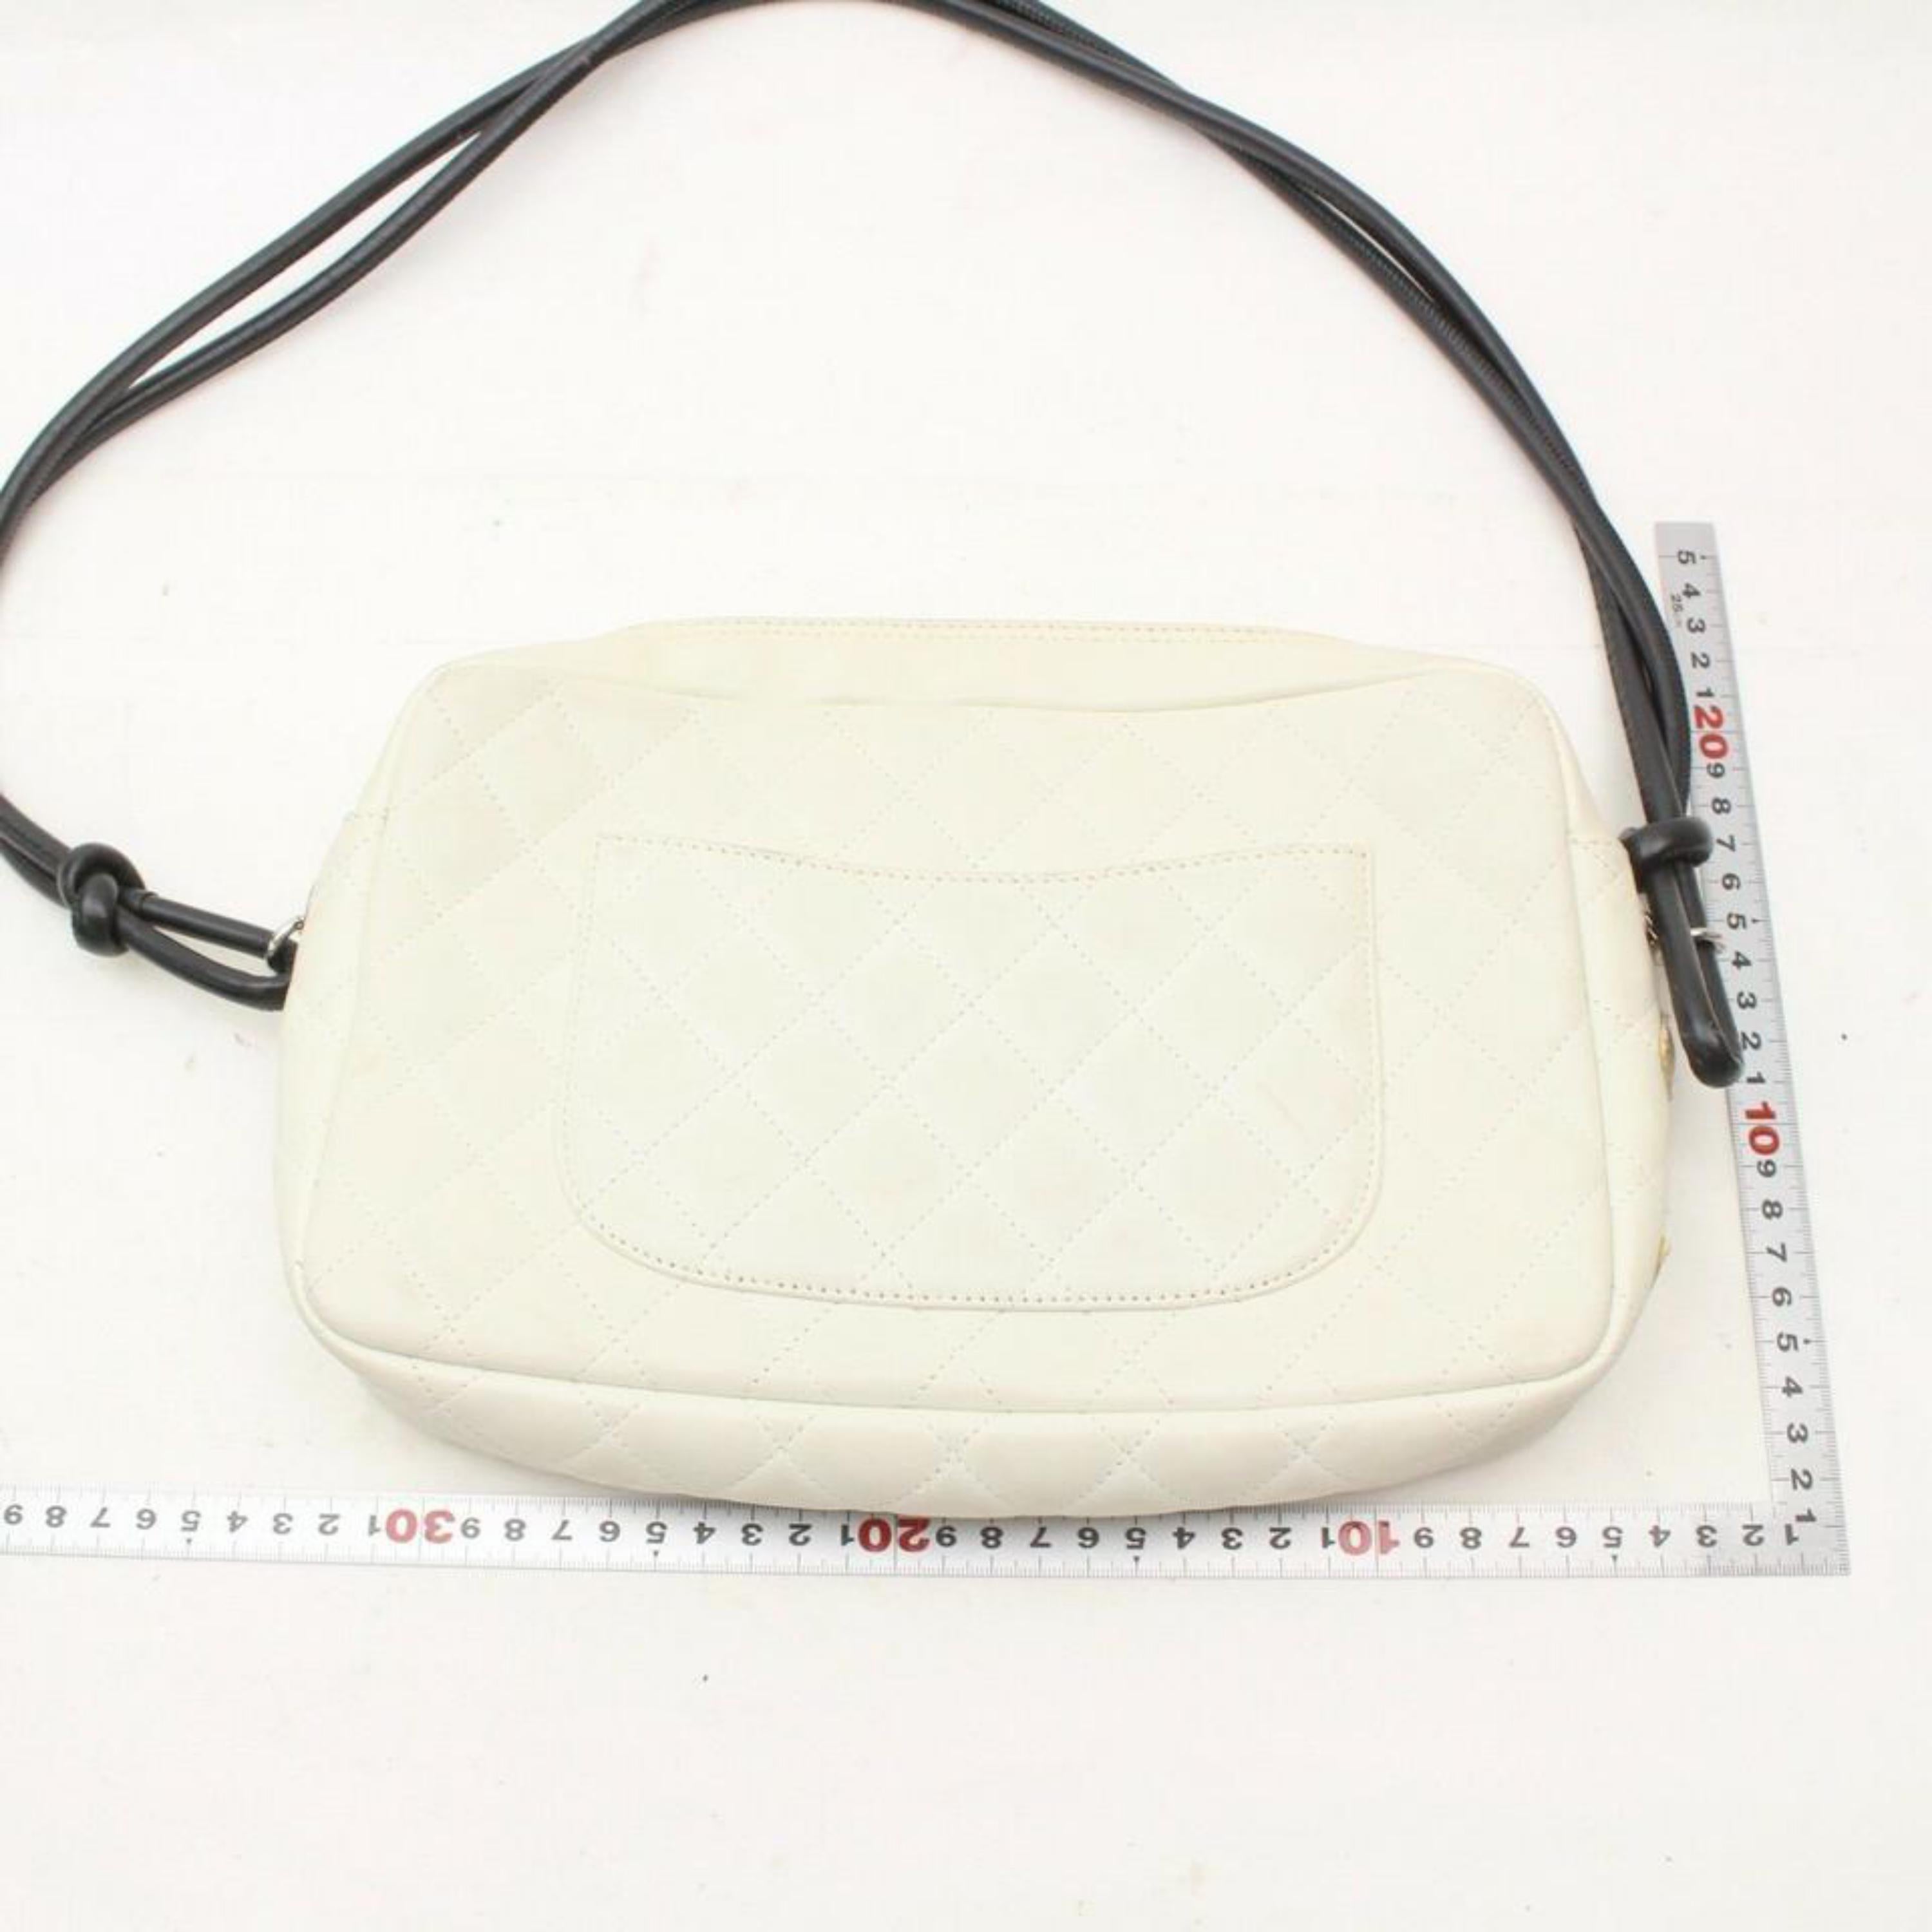 Chanel Cambon Python Quilted Ligne Flap 870036 White Leather Shoulder Bag For Sale 2